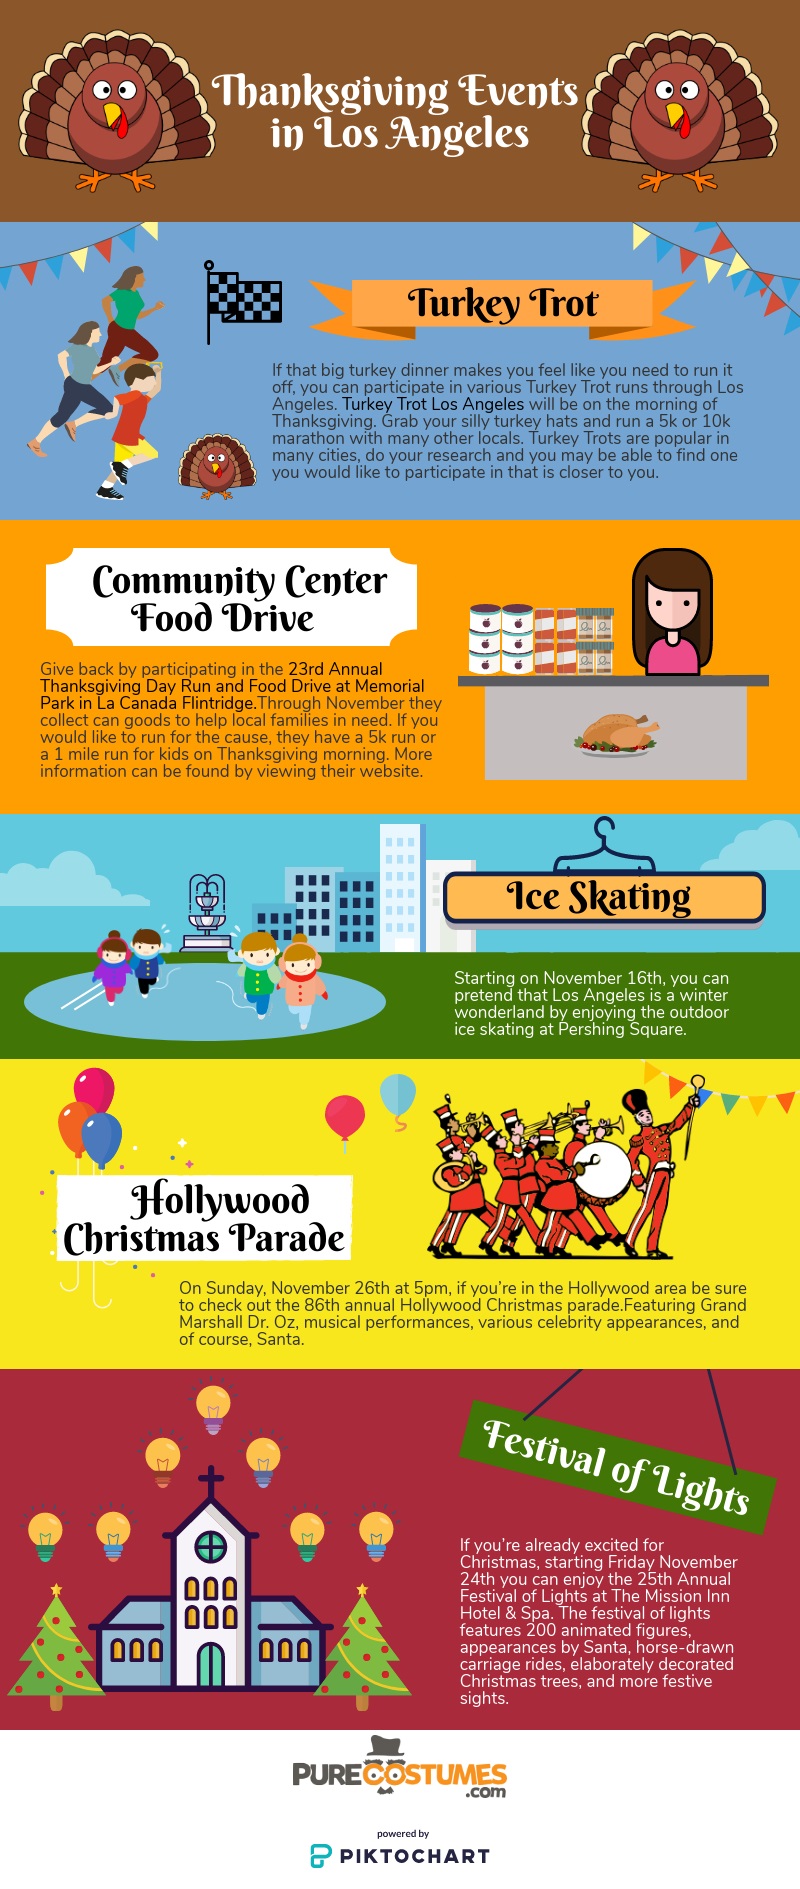 Thanksgiving Events in Los Angeles